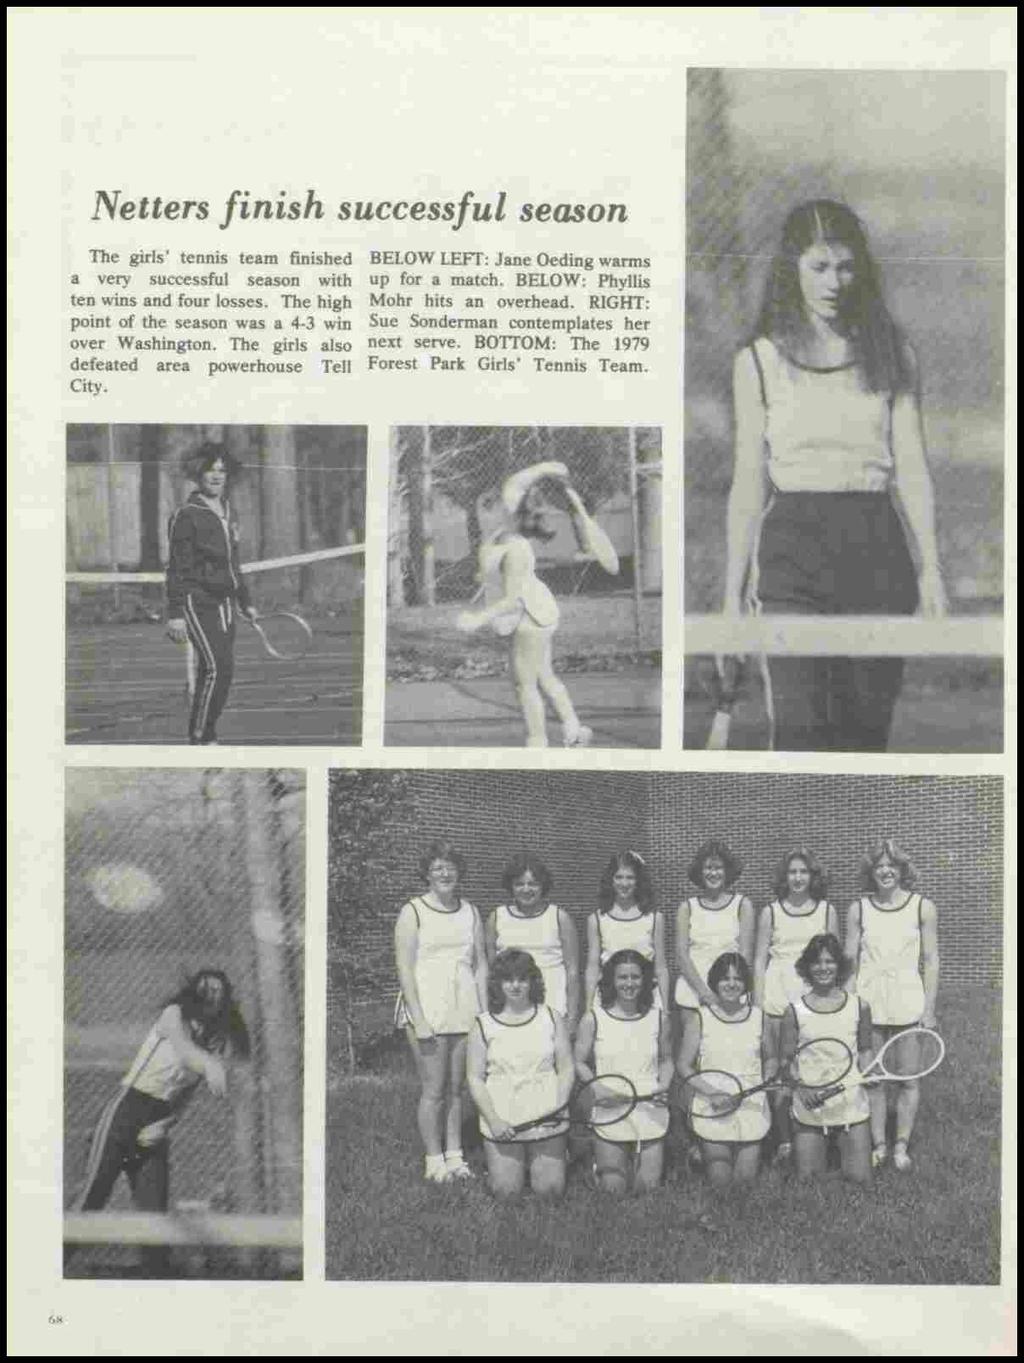 Netters finish successful season The girls' tennis team finished BELOW LEFf: Jane Oeding warms a very successful season with up for a match. BELOW: Phyllis ten wins and four losses.